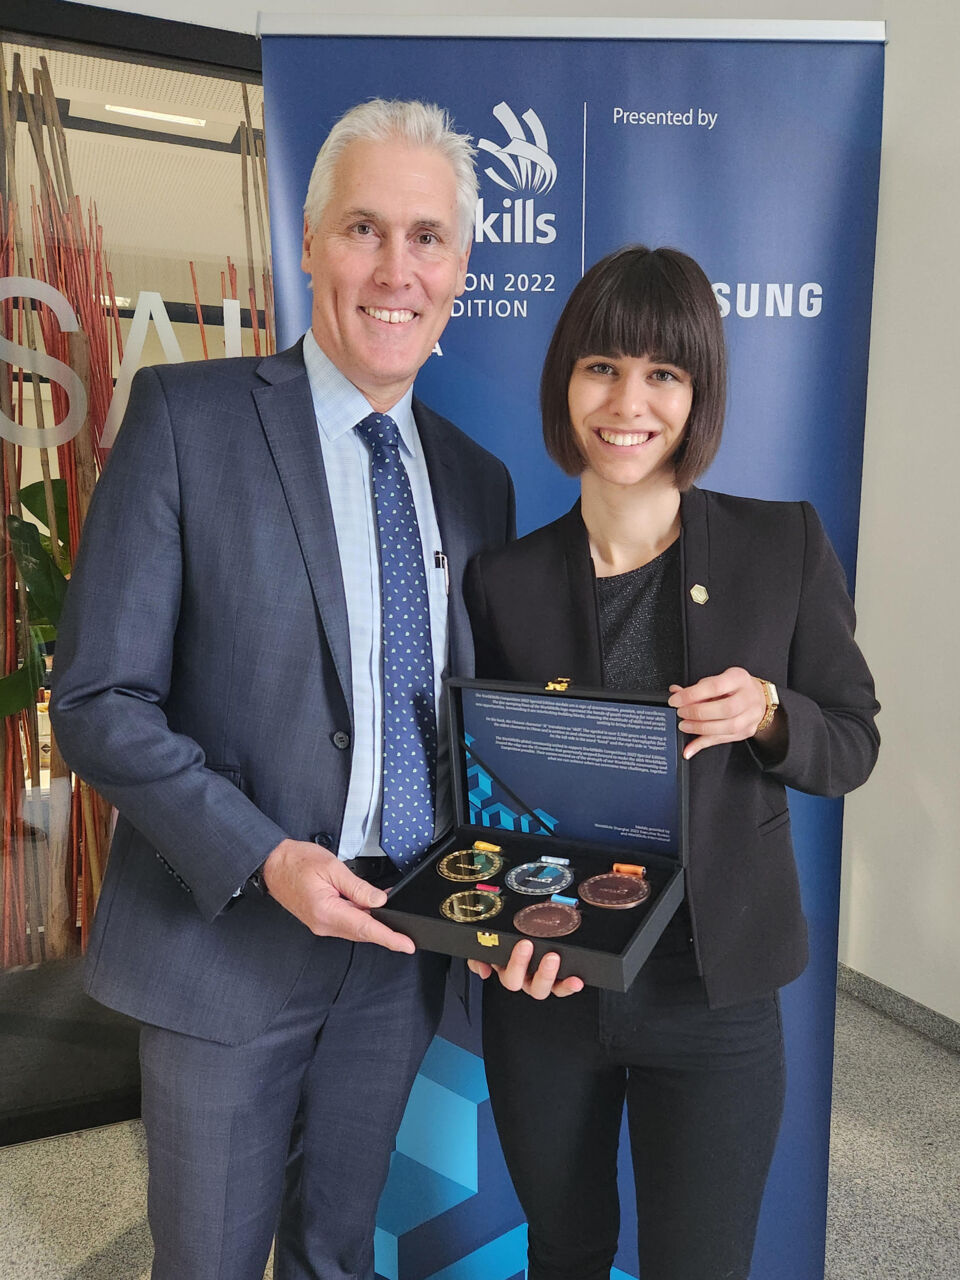 WorldSkills CEO David Hoey presenting Jacqueline Tanzer with a five-piece medal set in appreciation of her design work for WorldSkills Competition 2022 Special Edition at the final event in Salzburg, Austria in November 2022.